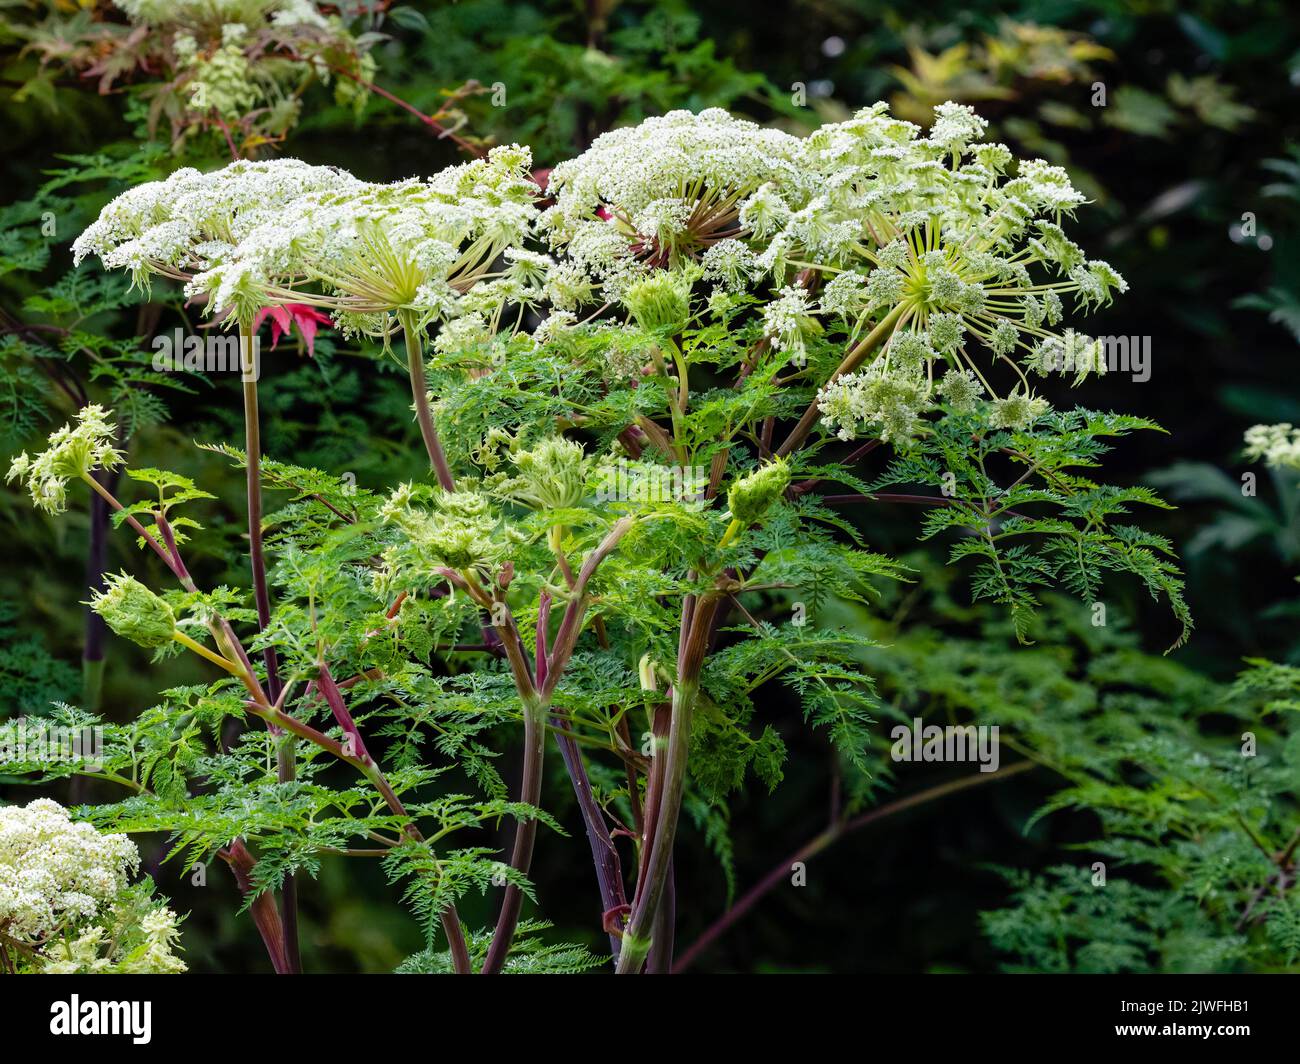 Domed umbels of starry white flowers above ferny foliage of the hardy perennial, Selinum wallichianum Stock Photo